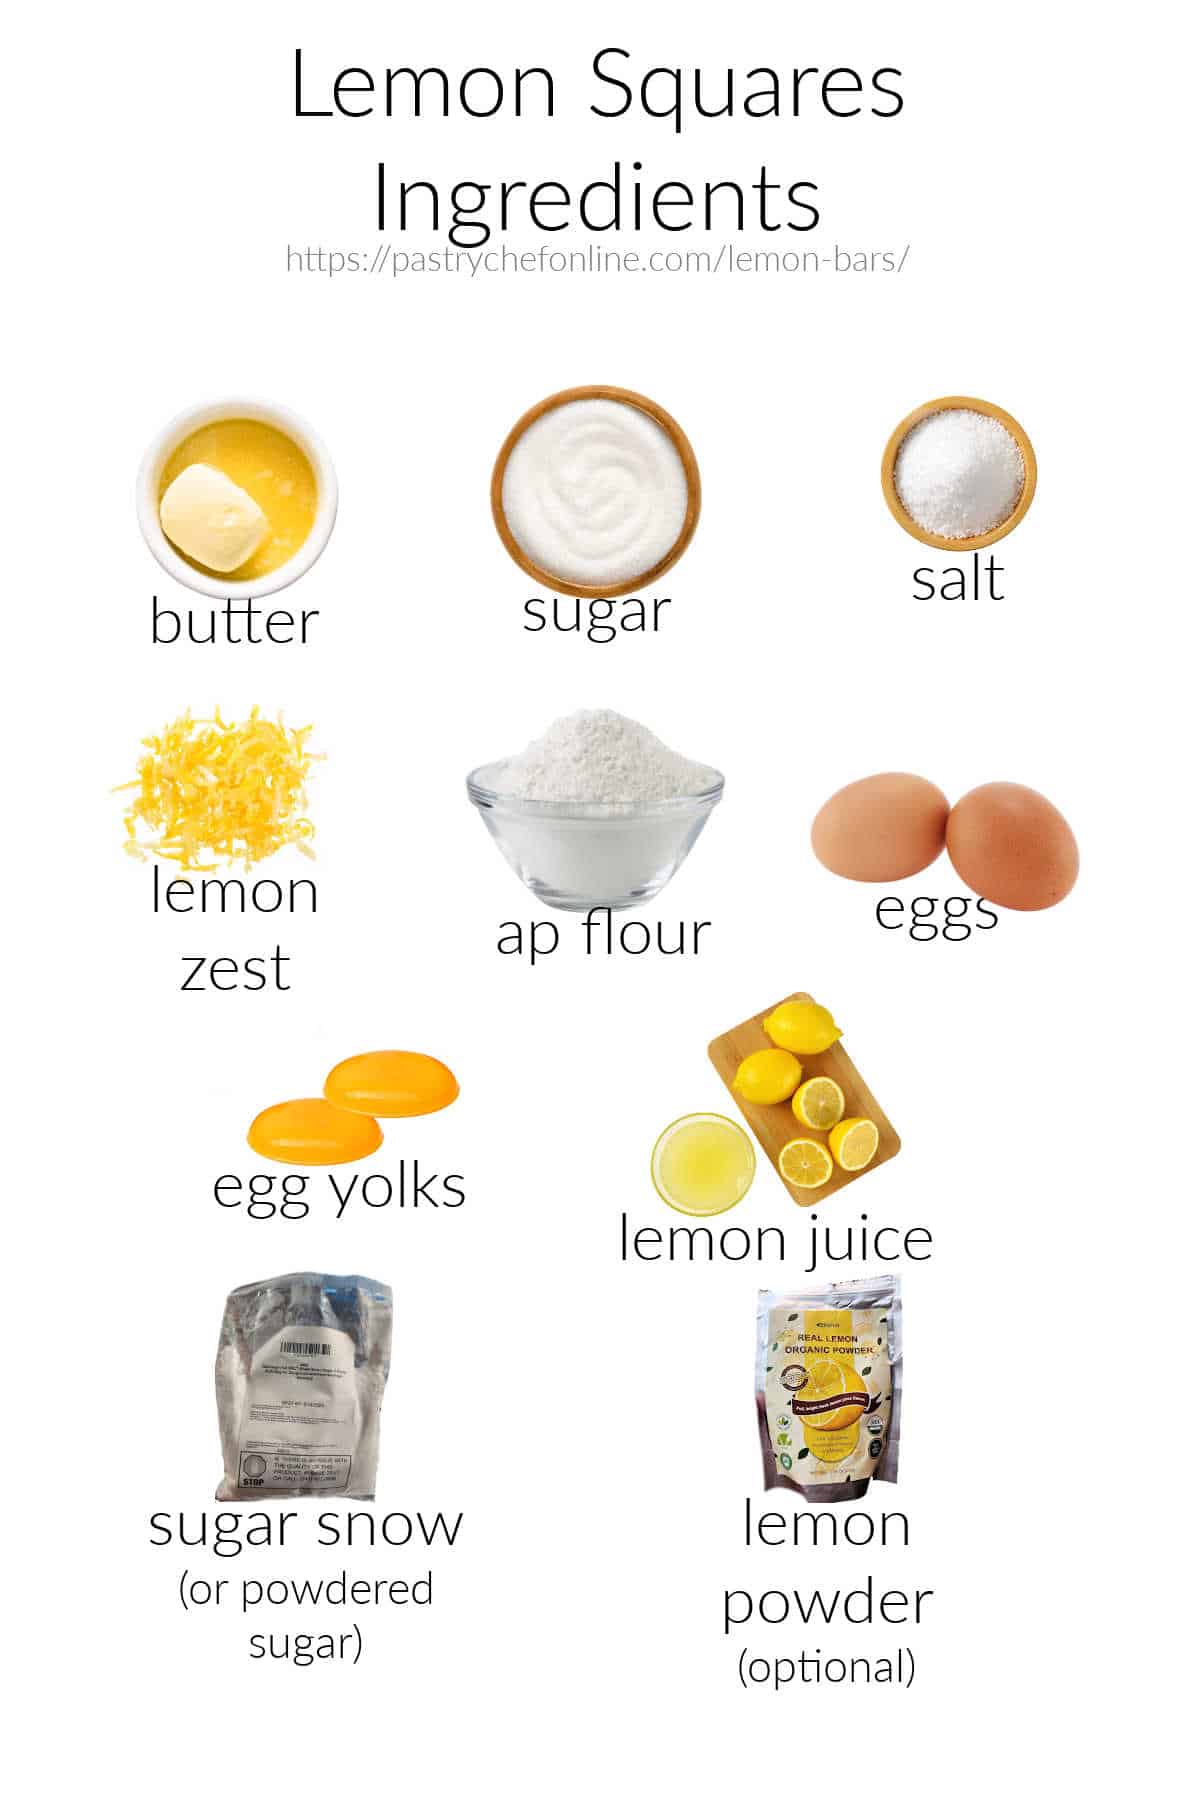 Images of all the ingredients needed to make lemon bars, labeled and on a white background. Ingredients are butter, sugar, salt, lemon zest, flour, eggs, yolkd, lemon juice, optional lemon powder, and sugar snow or powdered sugar.